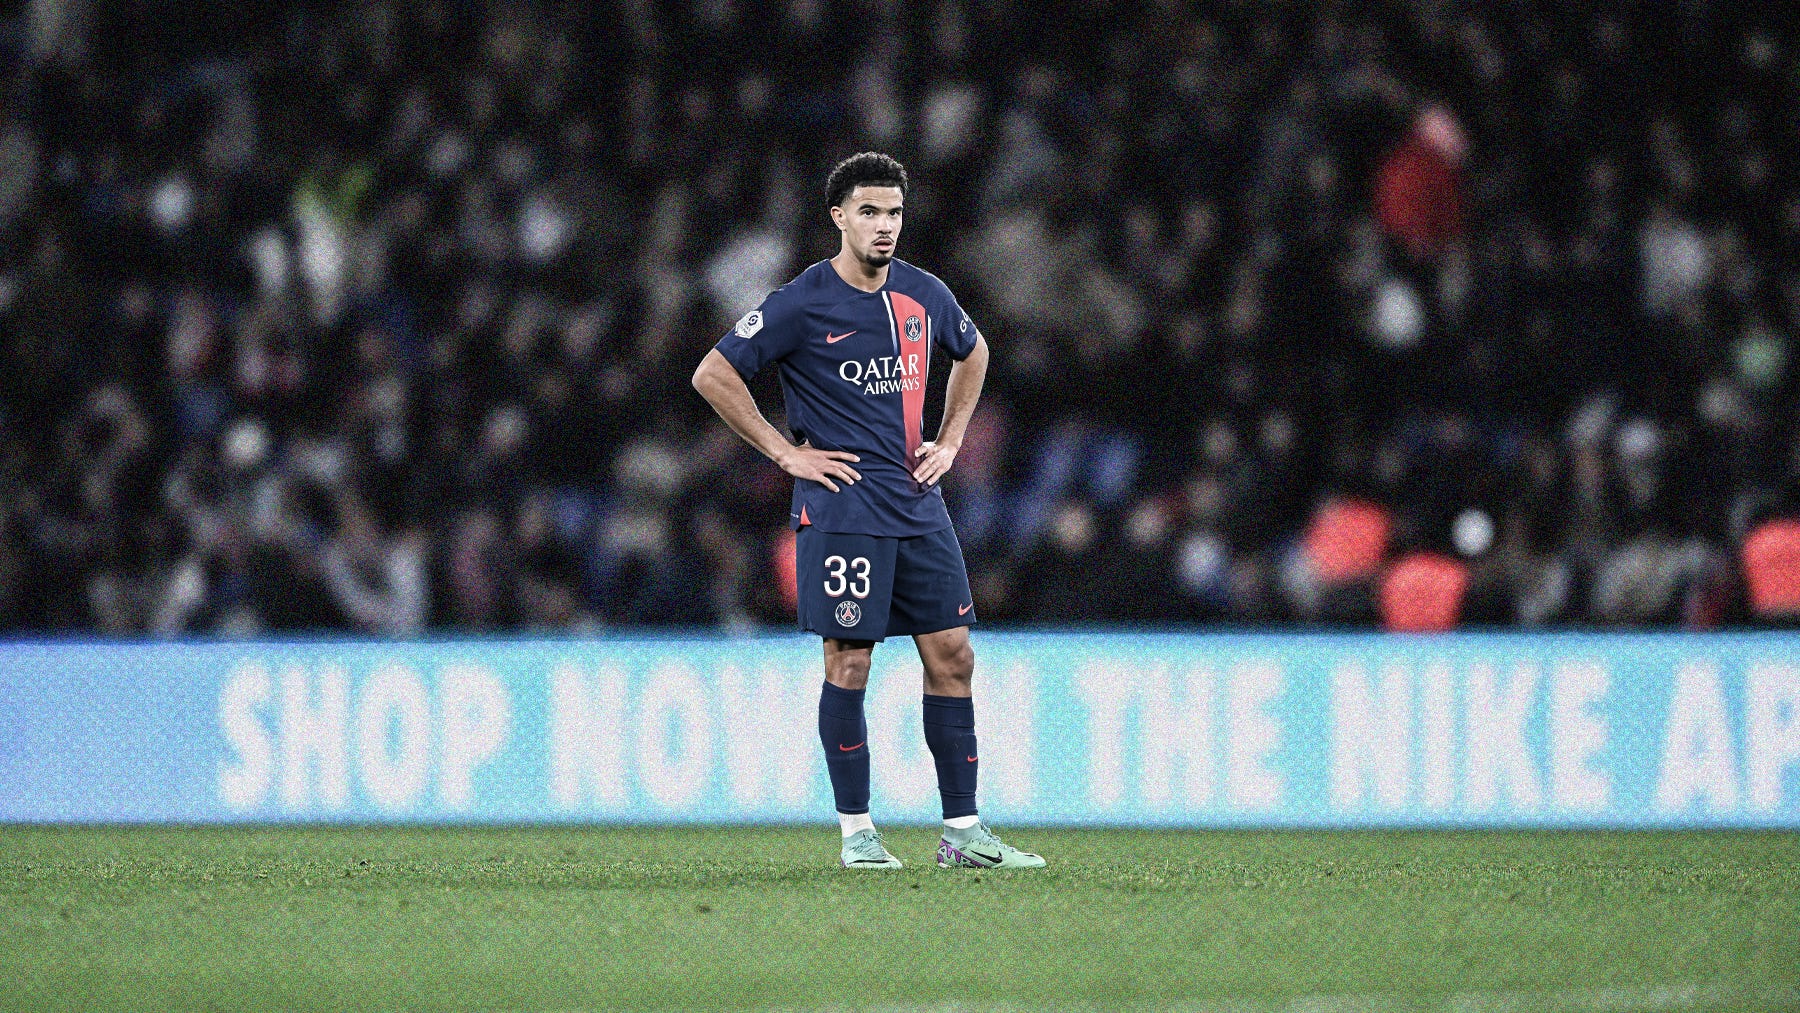 A wide-frame photo of Warren Zaïre-Emery in a navy Paris Saint-Germain kit, stood with hands on hips in front of a blurred crowd background